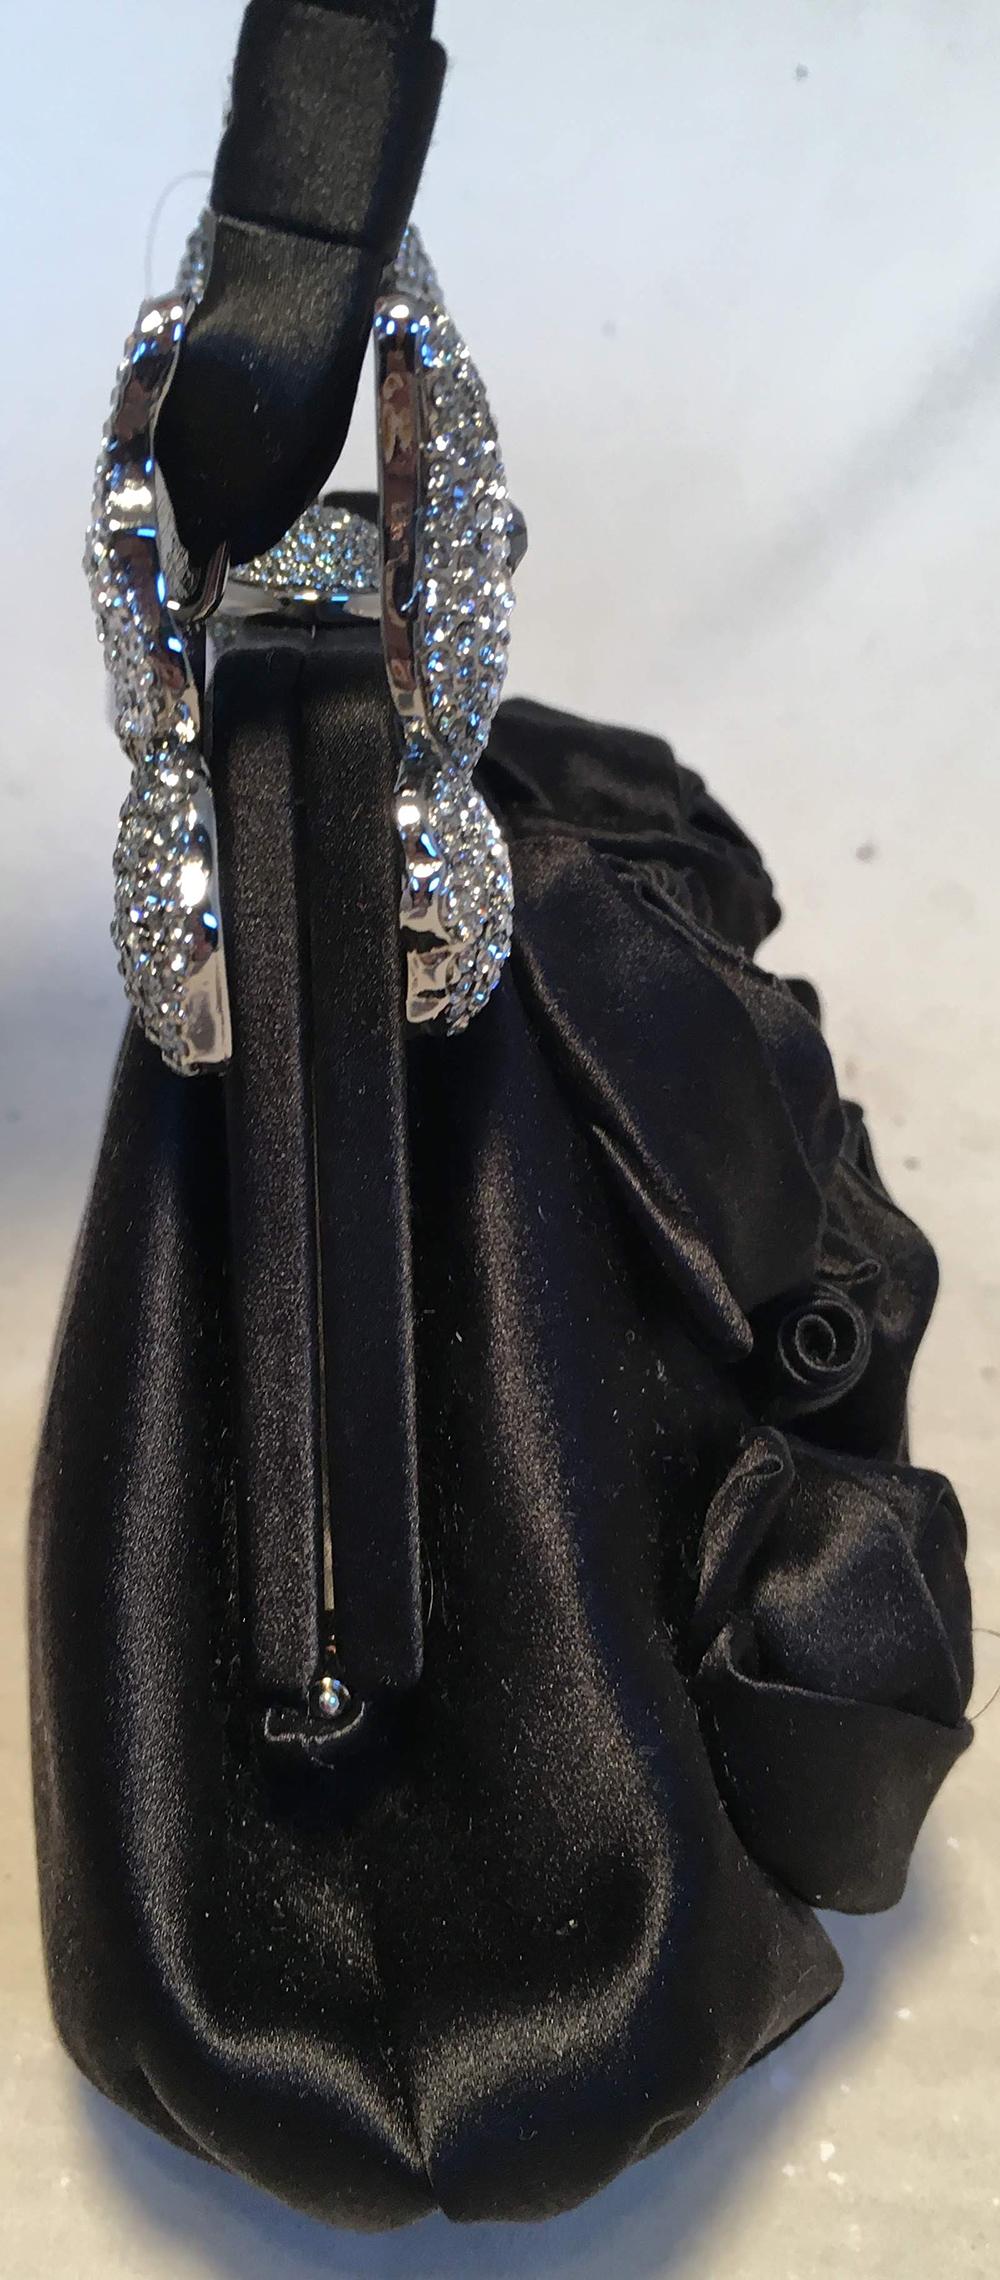 Valentino Black Silk Rose and Swarovski Crystal Butterfly Evening Bag in excellent condition. Black silk exterior trimmed with silver hardware, black silk rosettes along the front side, and swarovski crystal covered butterflies at the top ends of